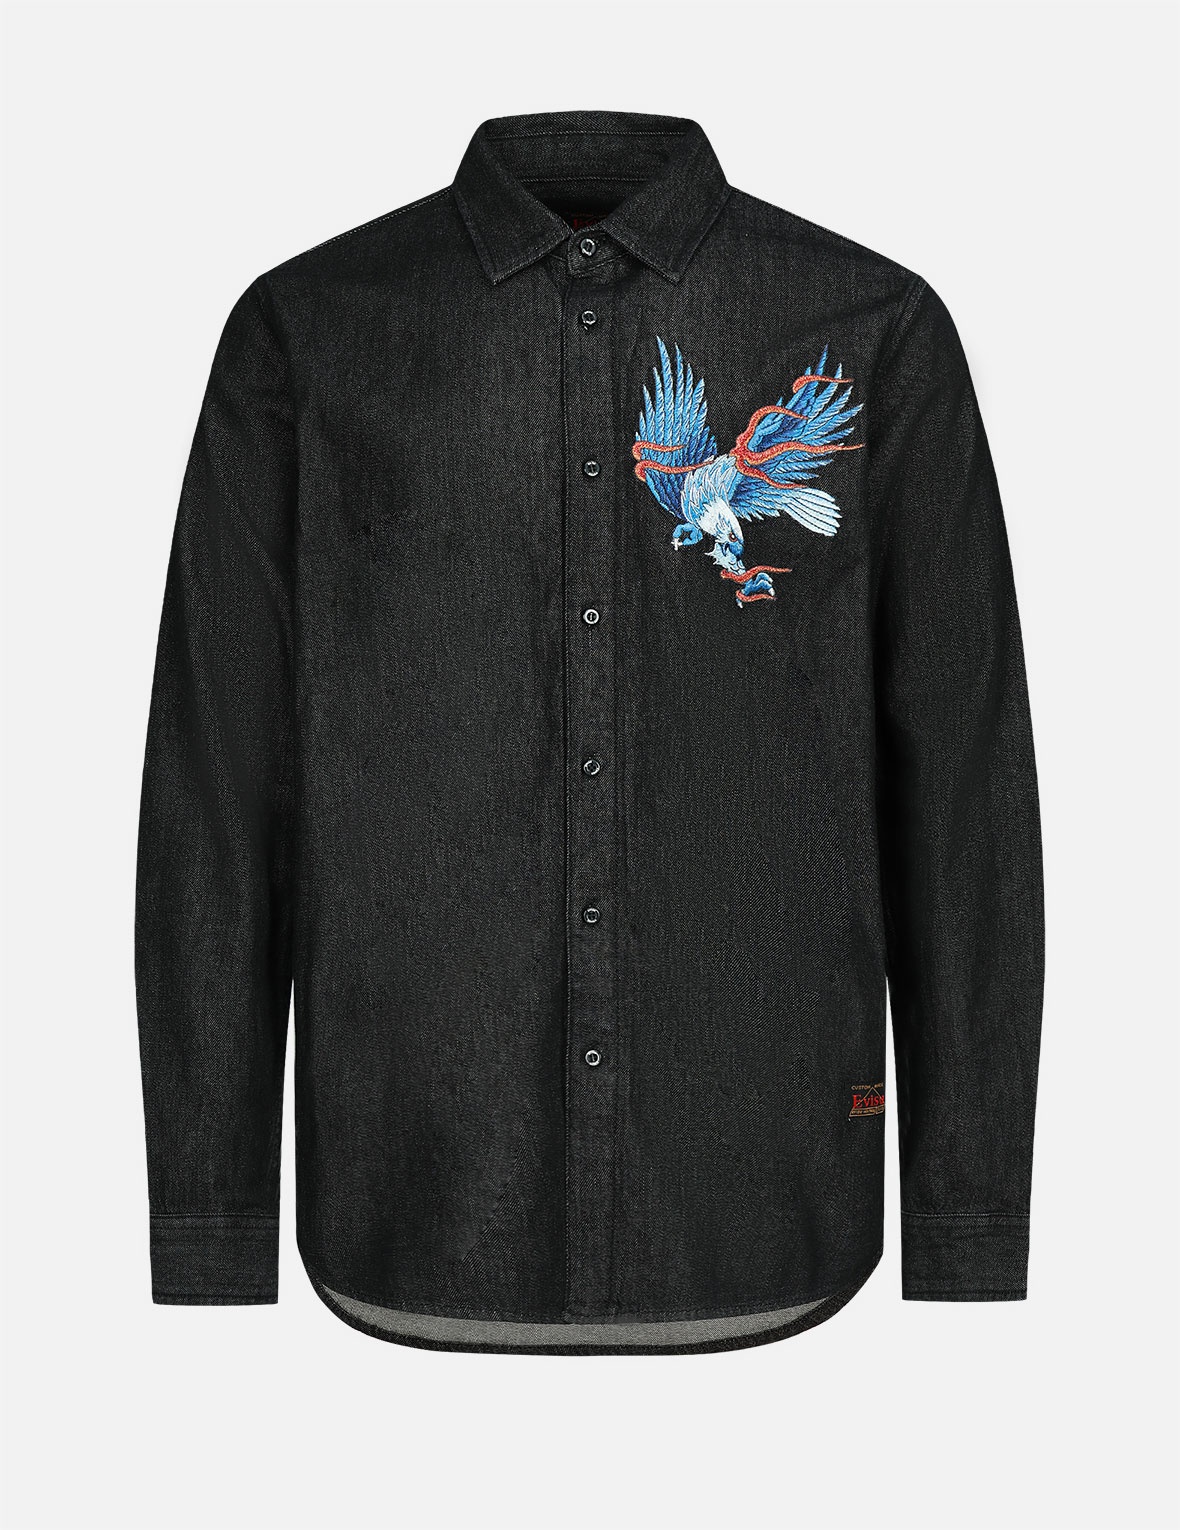 EAGLE AND SEAGULL EMBROIDERY DENIM SHIRT - 1